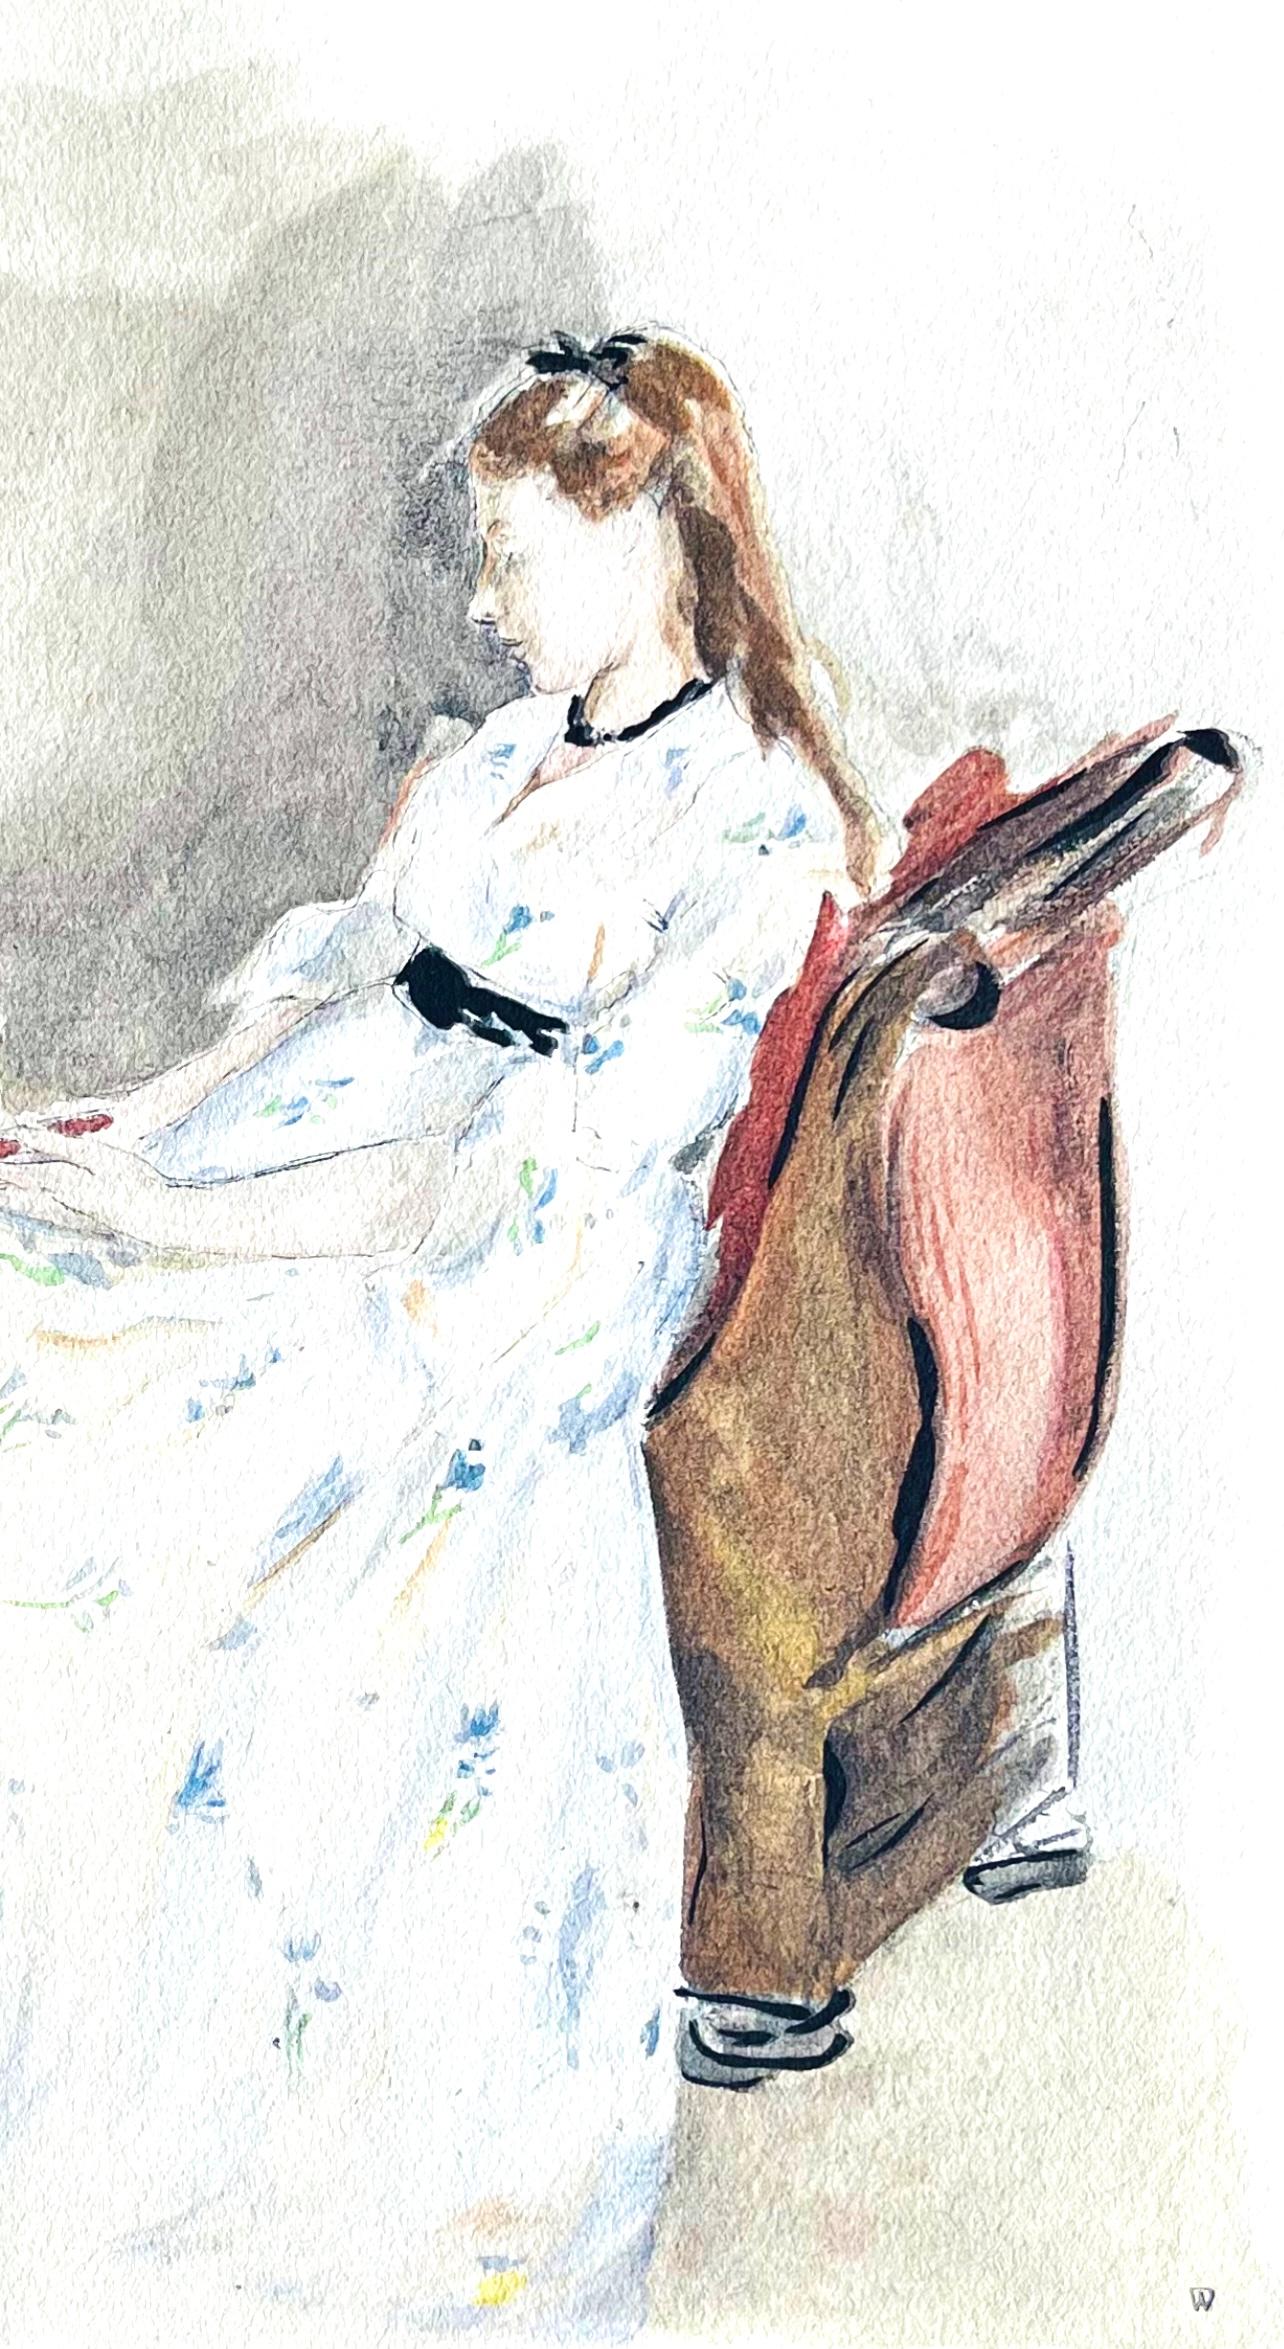 Lithograph and Stencil on vélin du Marais paper. Inscription: unsigned and unnumbered, as issued. Good condition with centerfold, as issued. Notes: From the folio, Berthe Morisot Seize Aquarelles, 1946. Published by Éditions des Quatre Chemins,